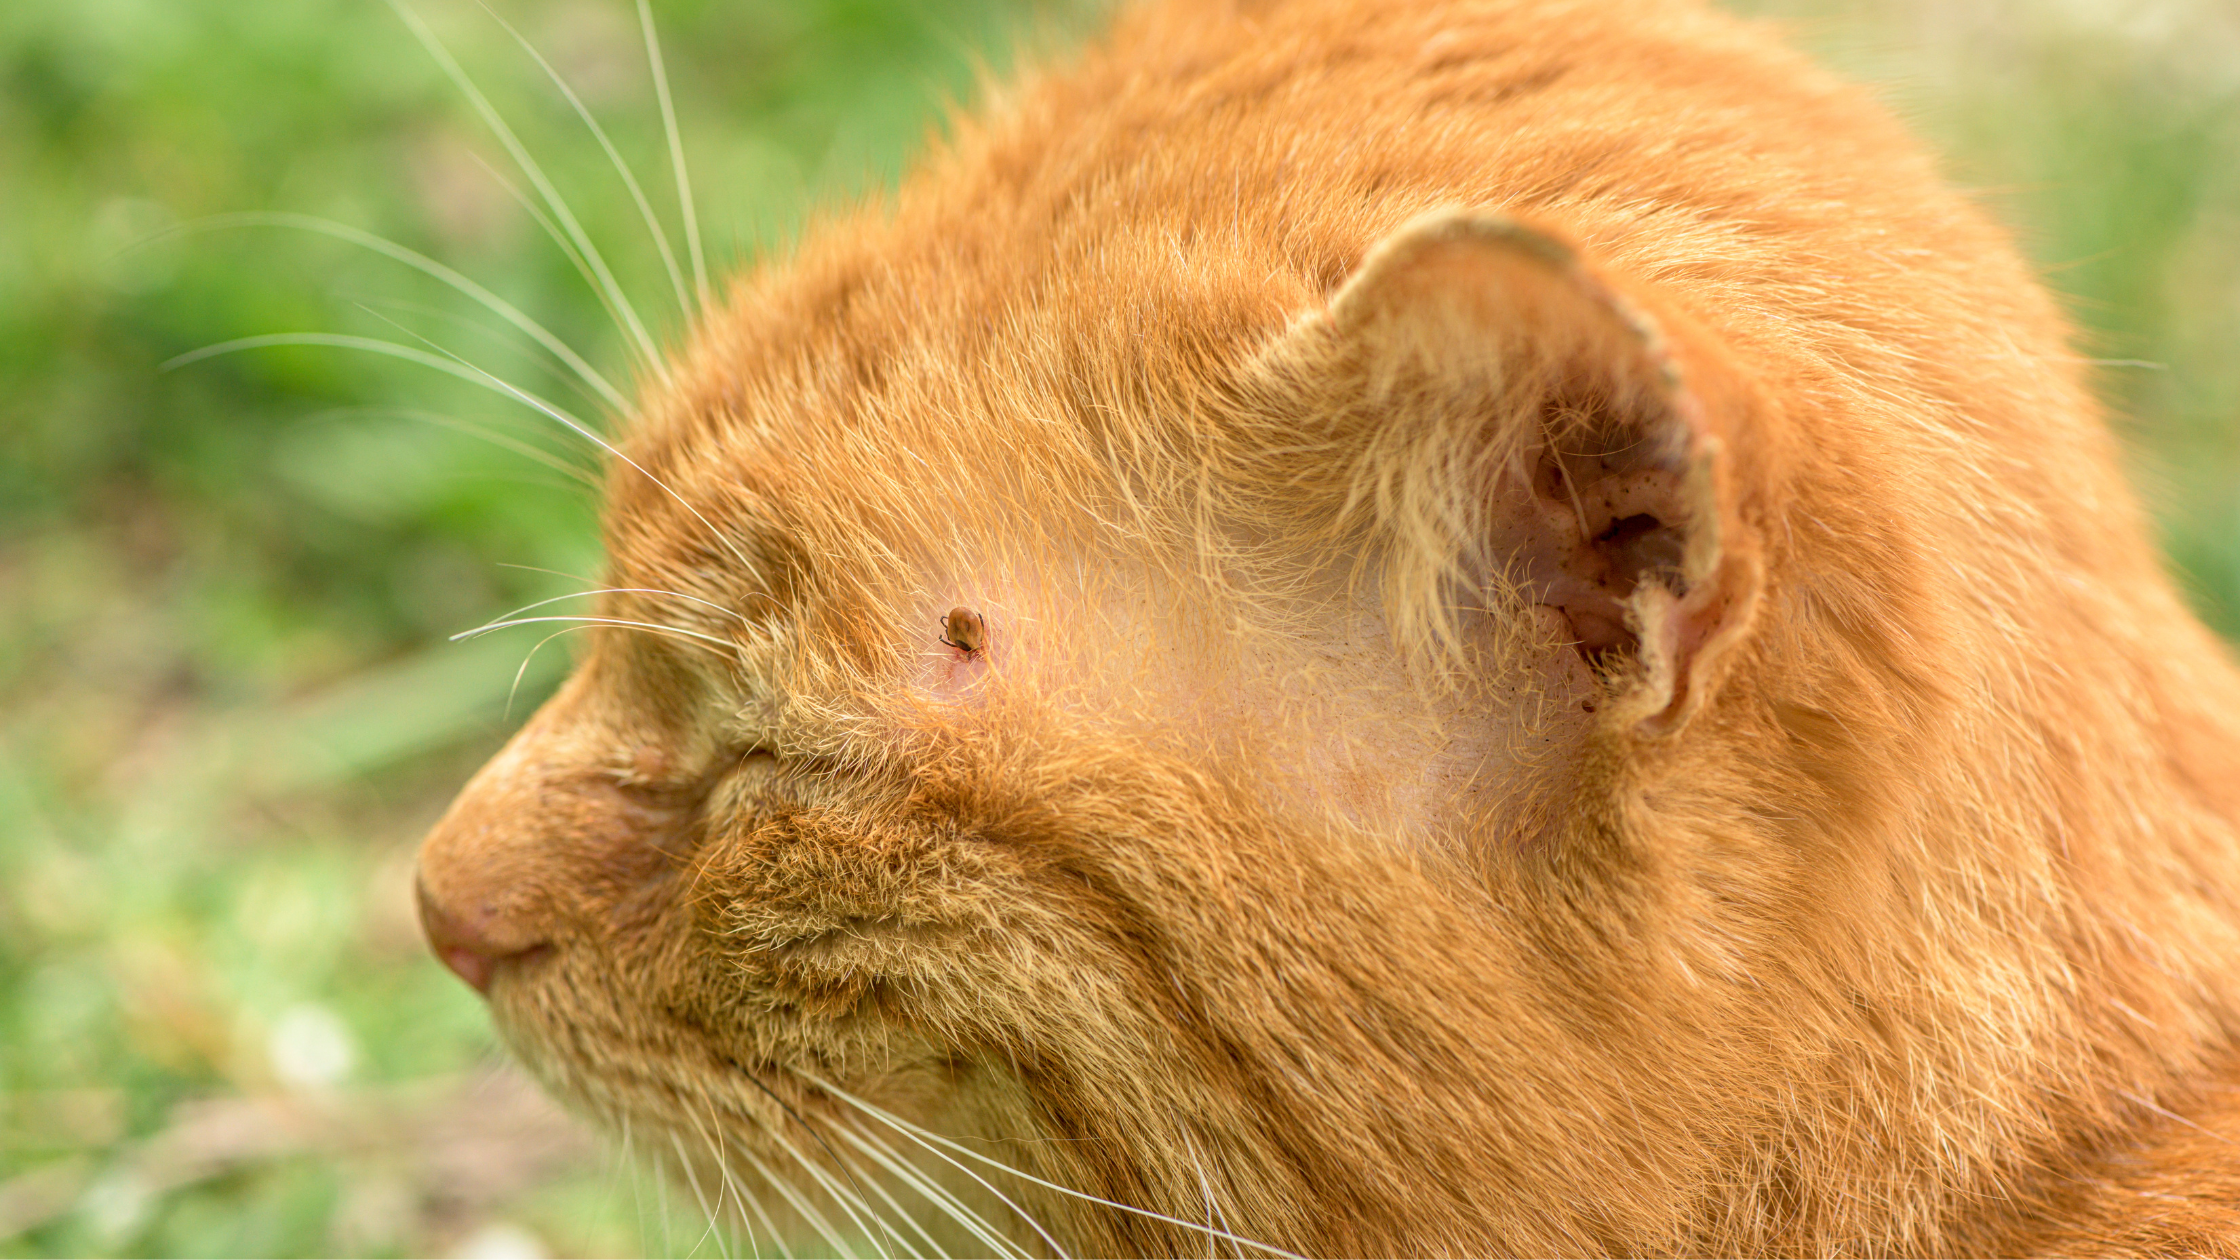 a close up of an orange cat with a tick near his eyes